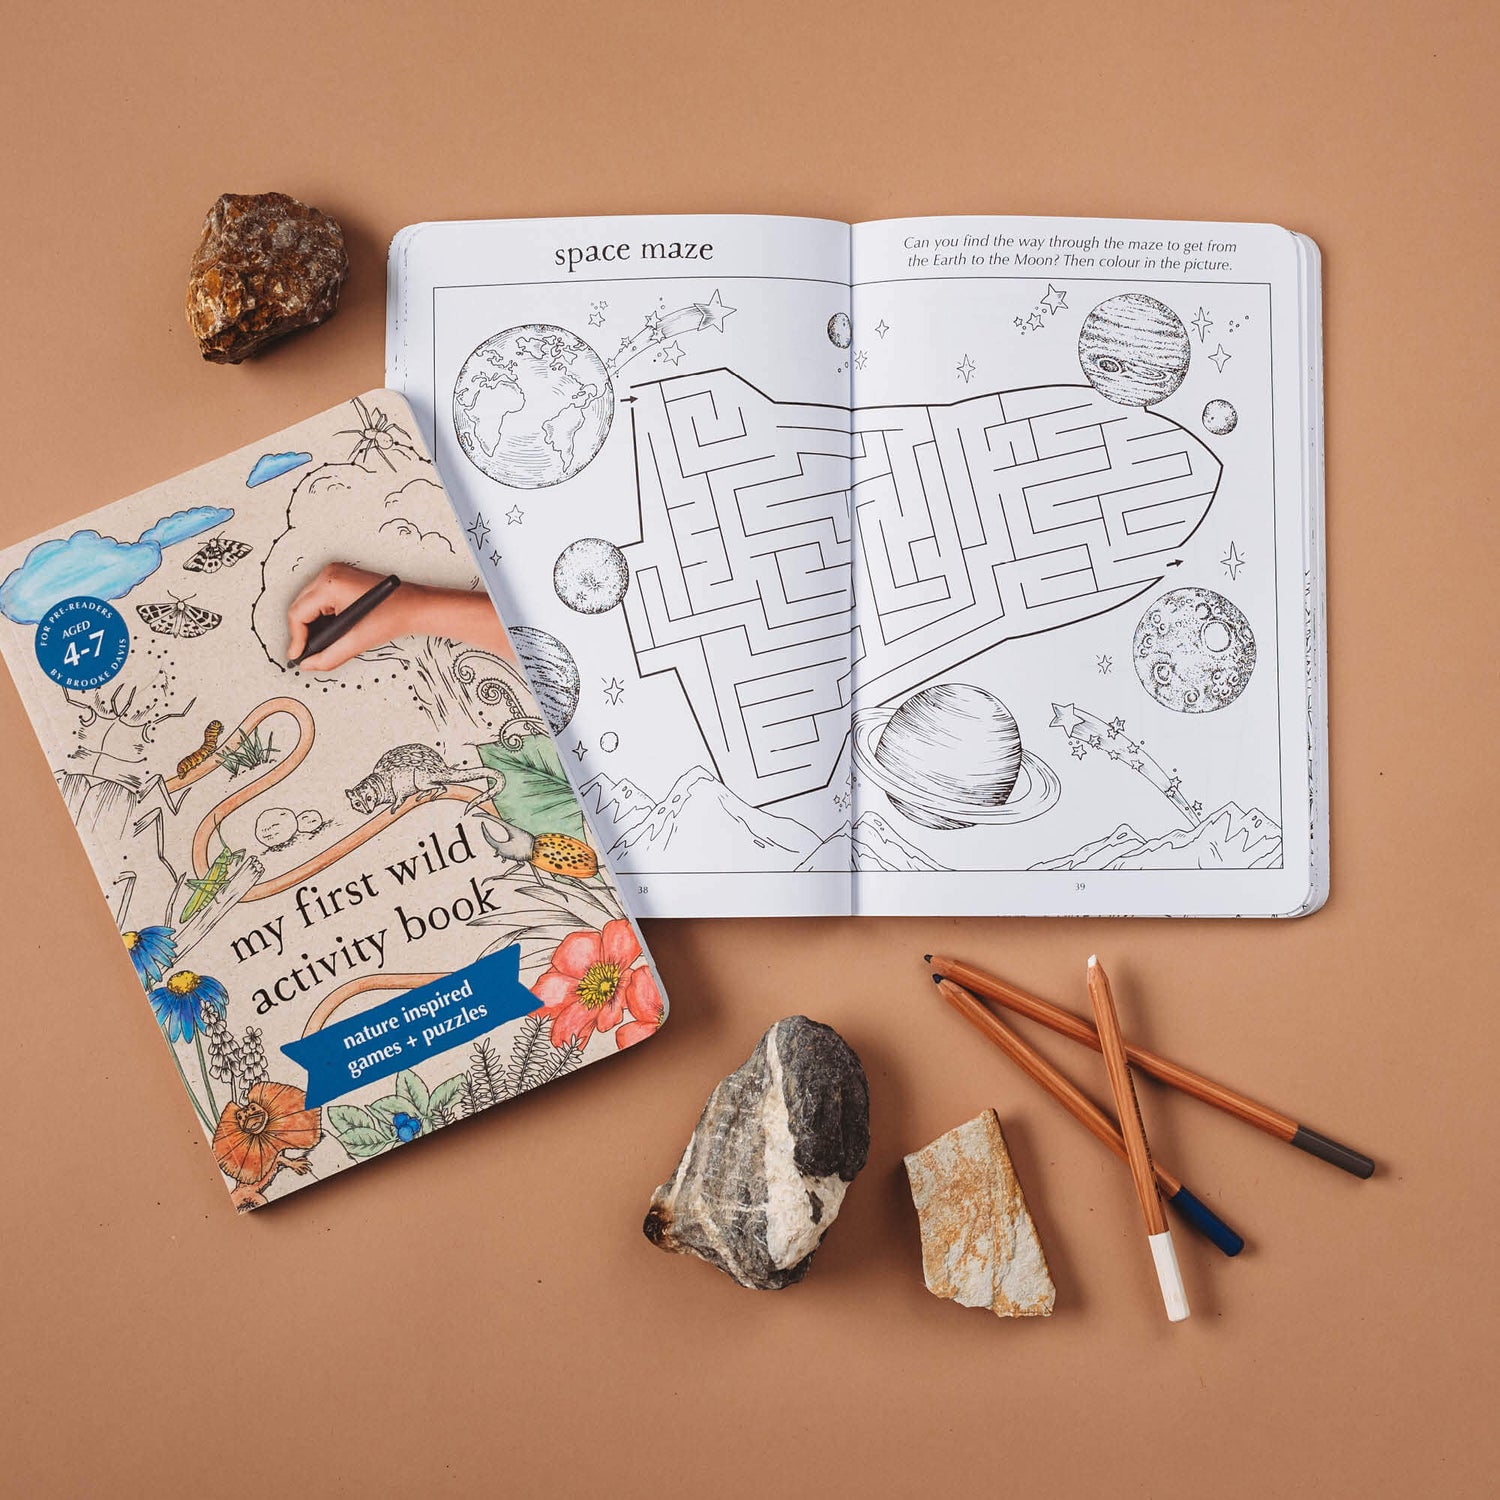 My First Wild Activity Book made in Australia by Your Wild Books includes mazes and other nature inspired puzzles